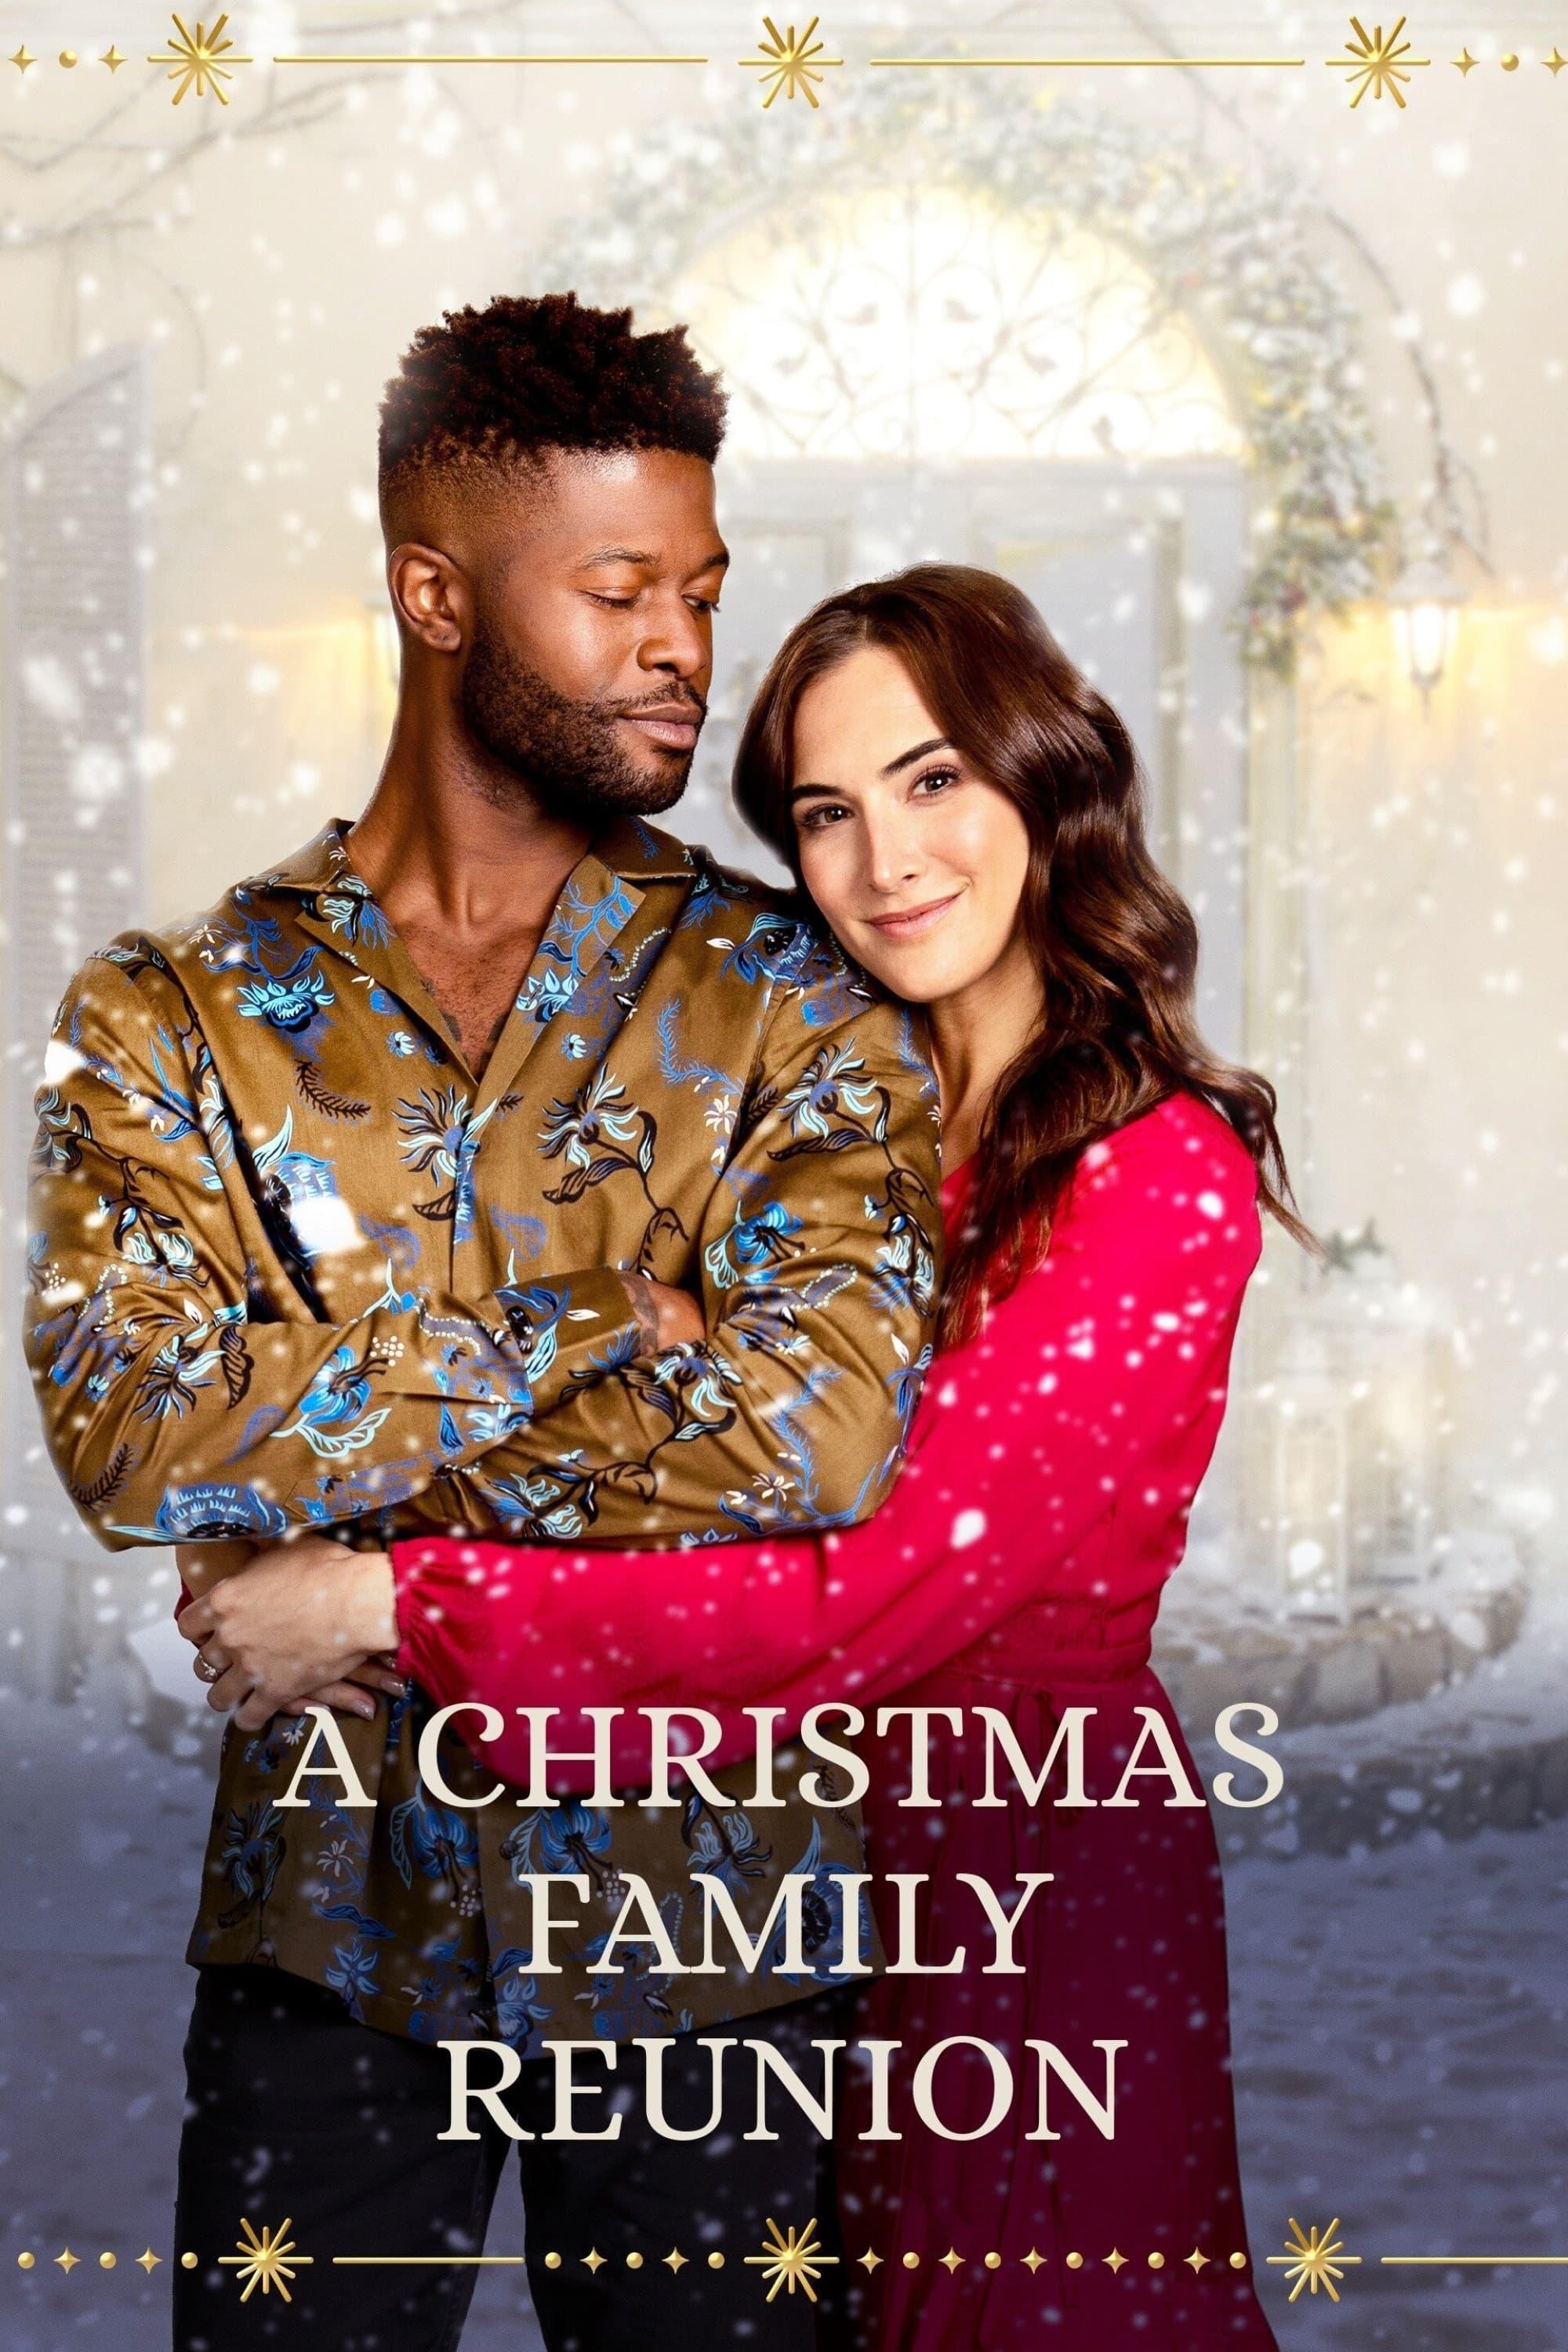 Welcome to the Christmas Family Reunion poster